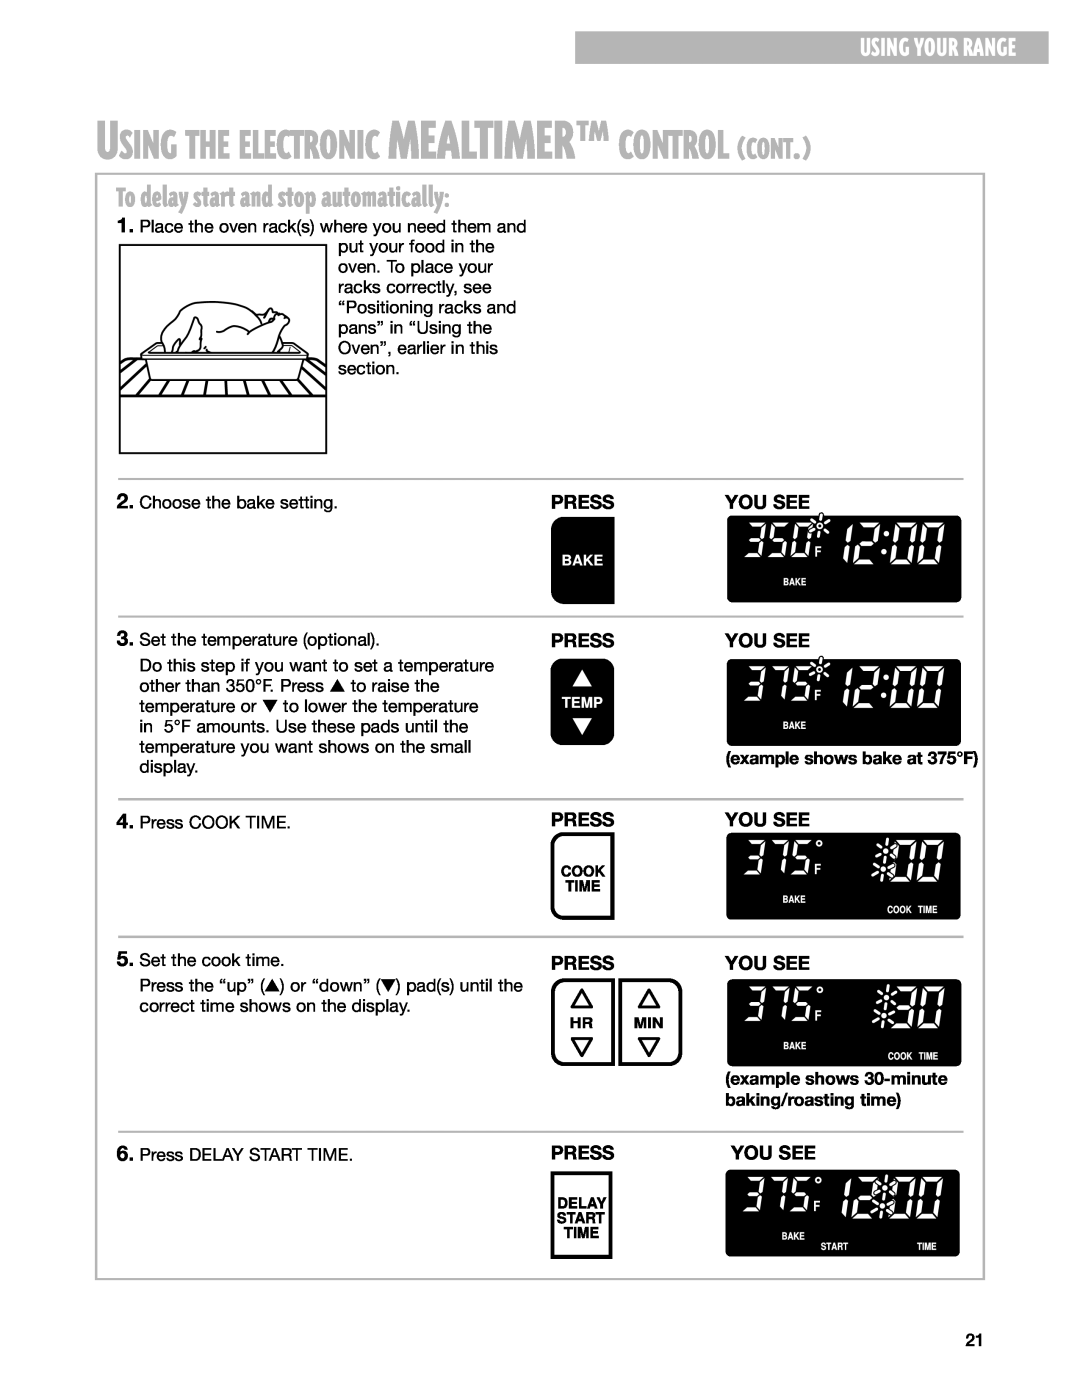 Whirlpool GS395LEG To delay start and stop automatically, Using The Electronic Mealtimerª Control Cont, Using Your Range 